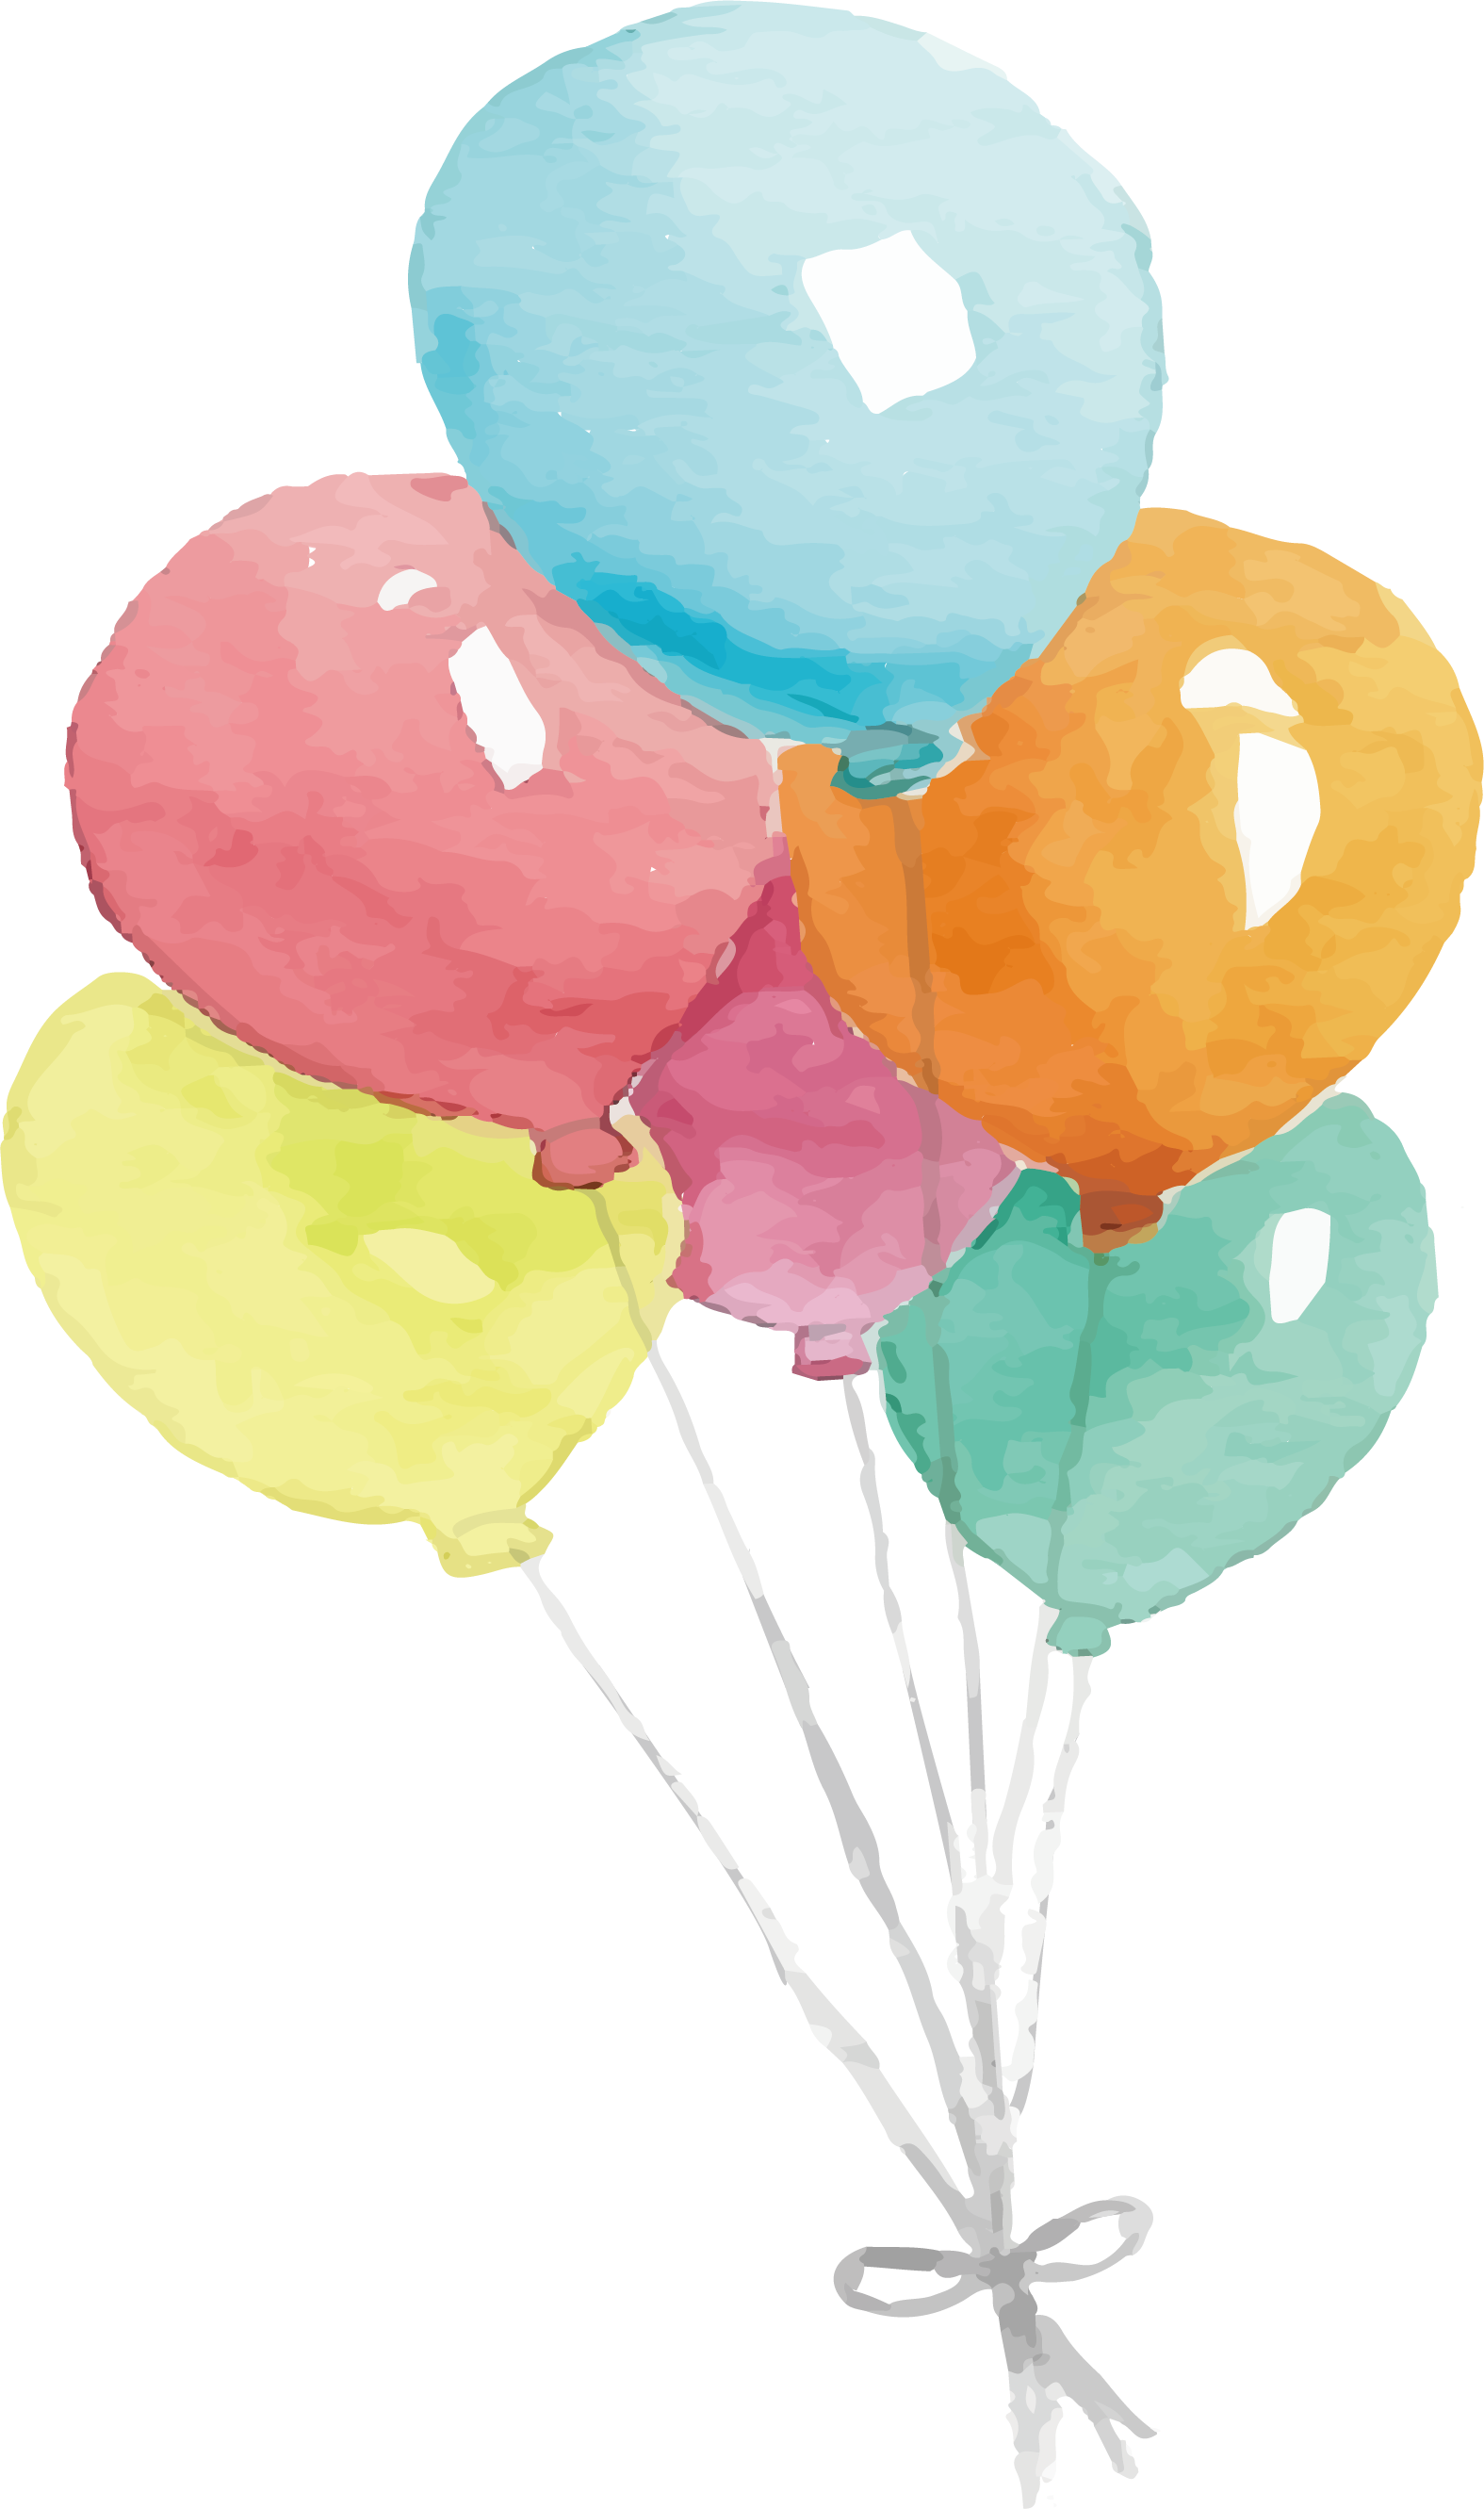 Watercolor Balloons Watercolor Clipart Hand Painted Balloon Png | My ...